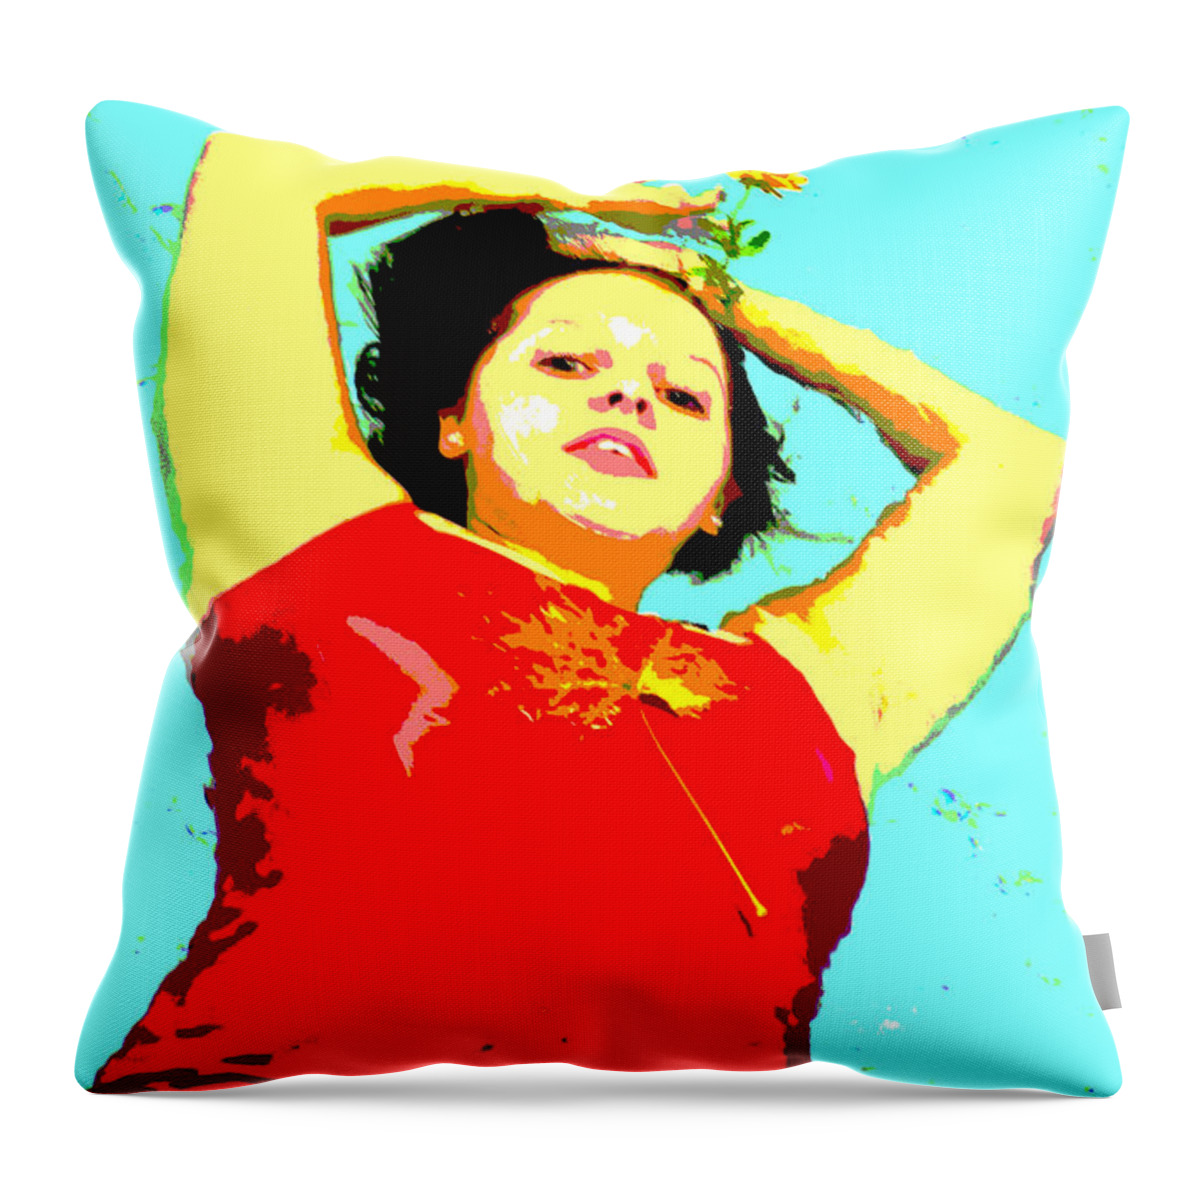 Girl Throw Pillow featuring the photograph Poster Girl 2 by Randi Grace Nilsberg